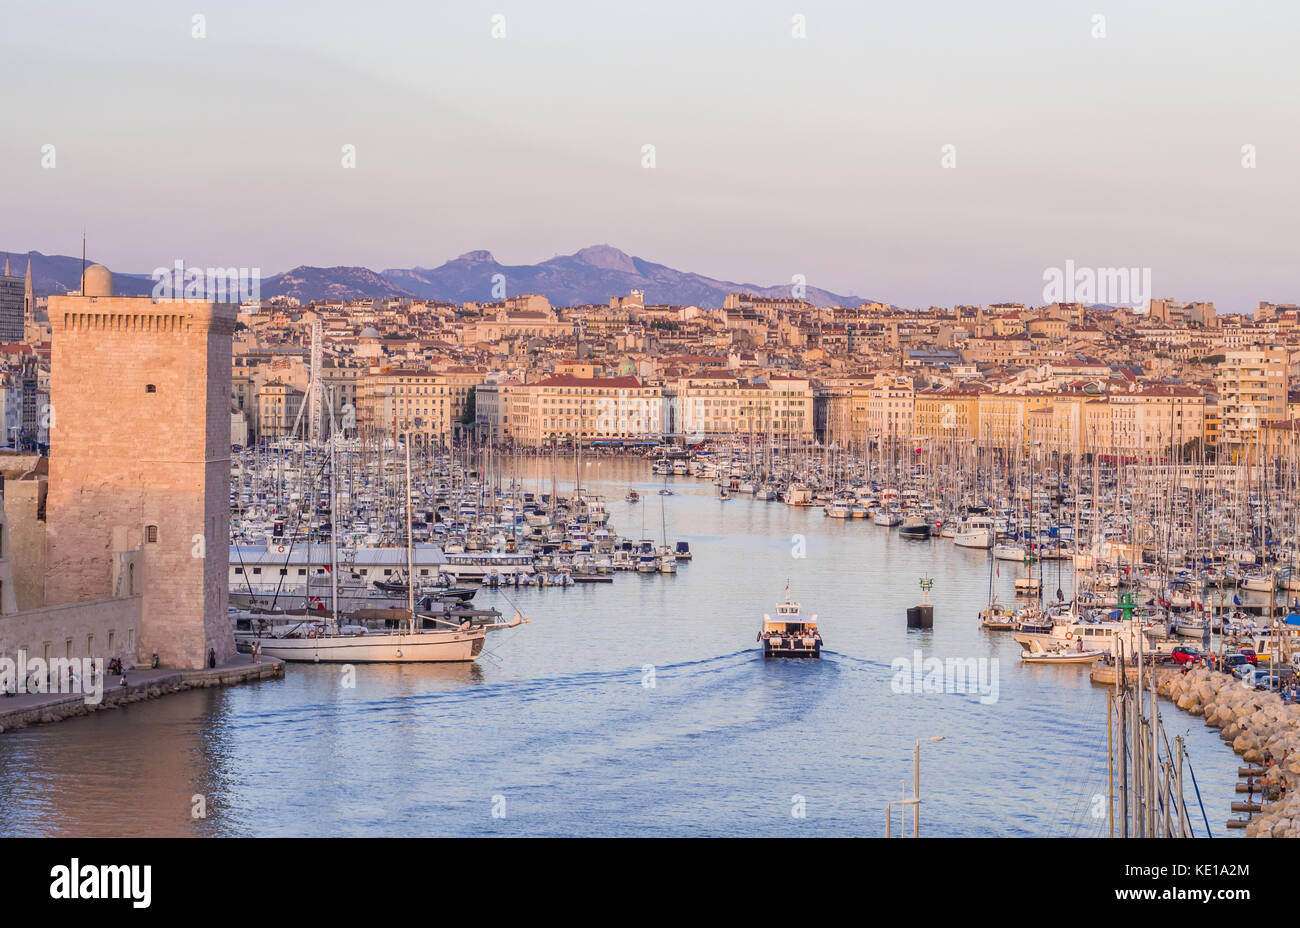 MARSEILLE, FRANCE - AUGUST 07, 2017: The old Vieux Port of Marseille beneath Cathedral of Notre Dame, France, at sunset. Stock Photo